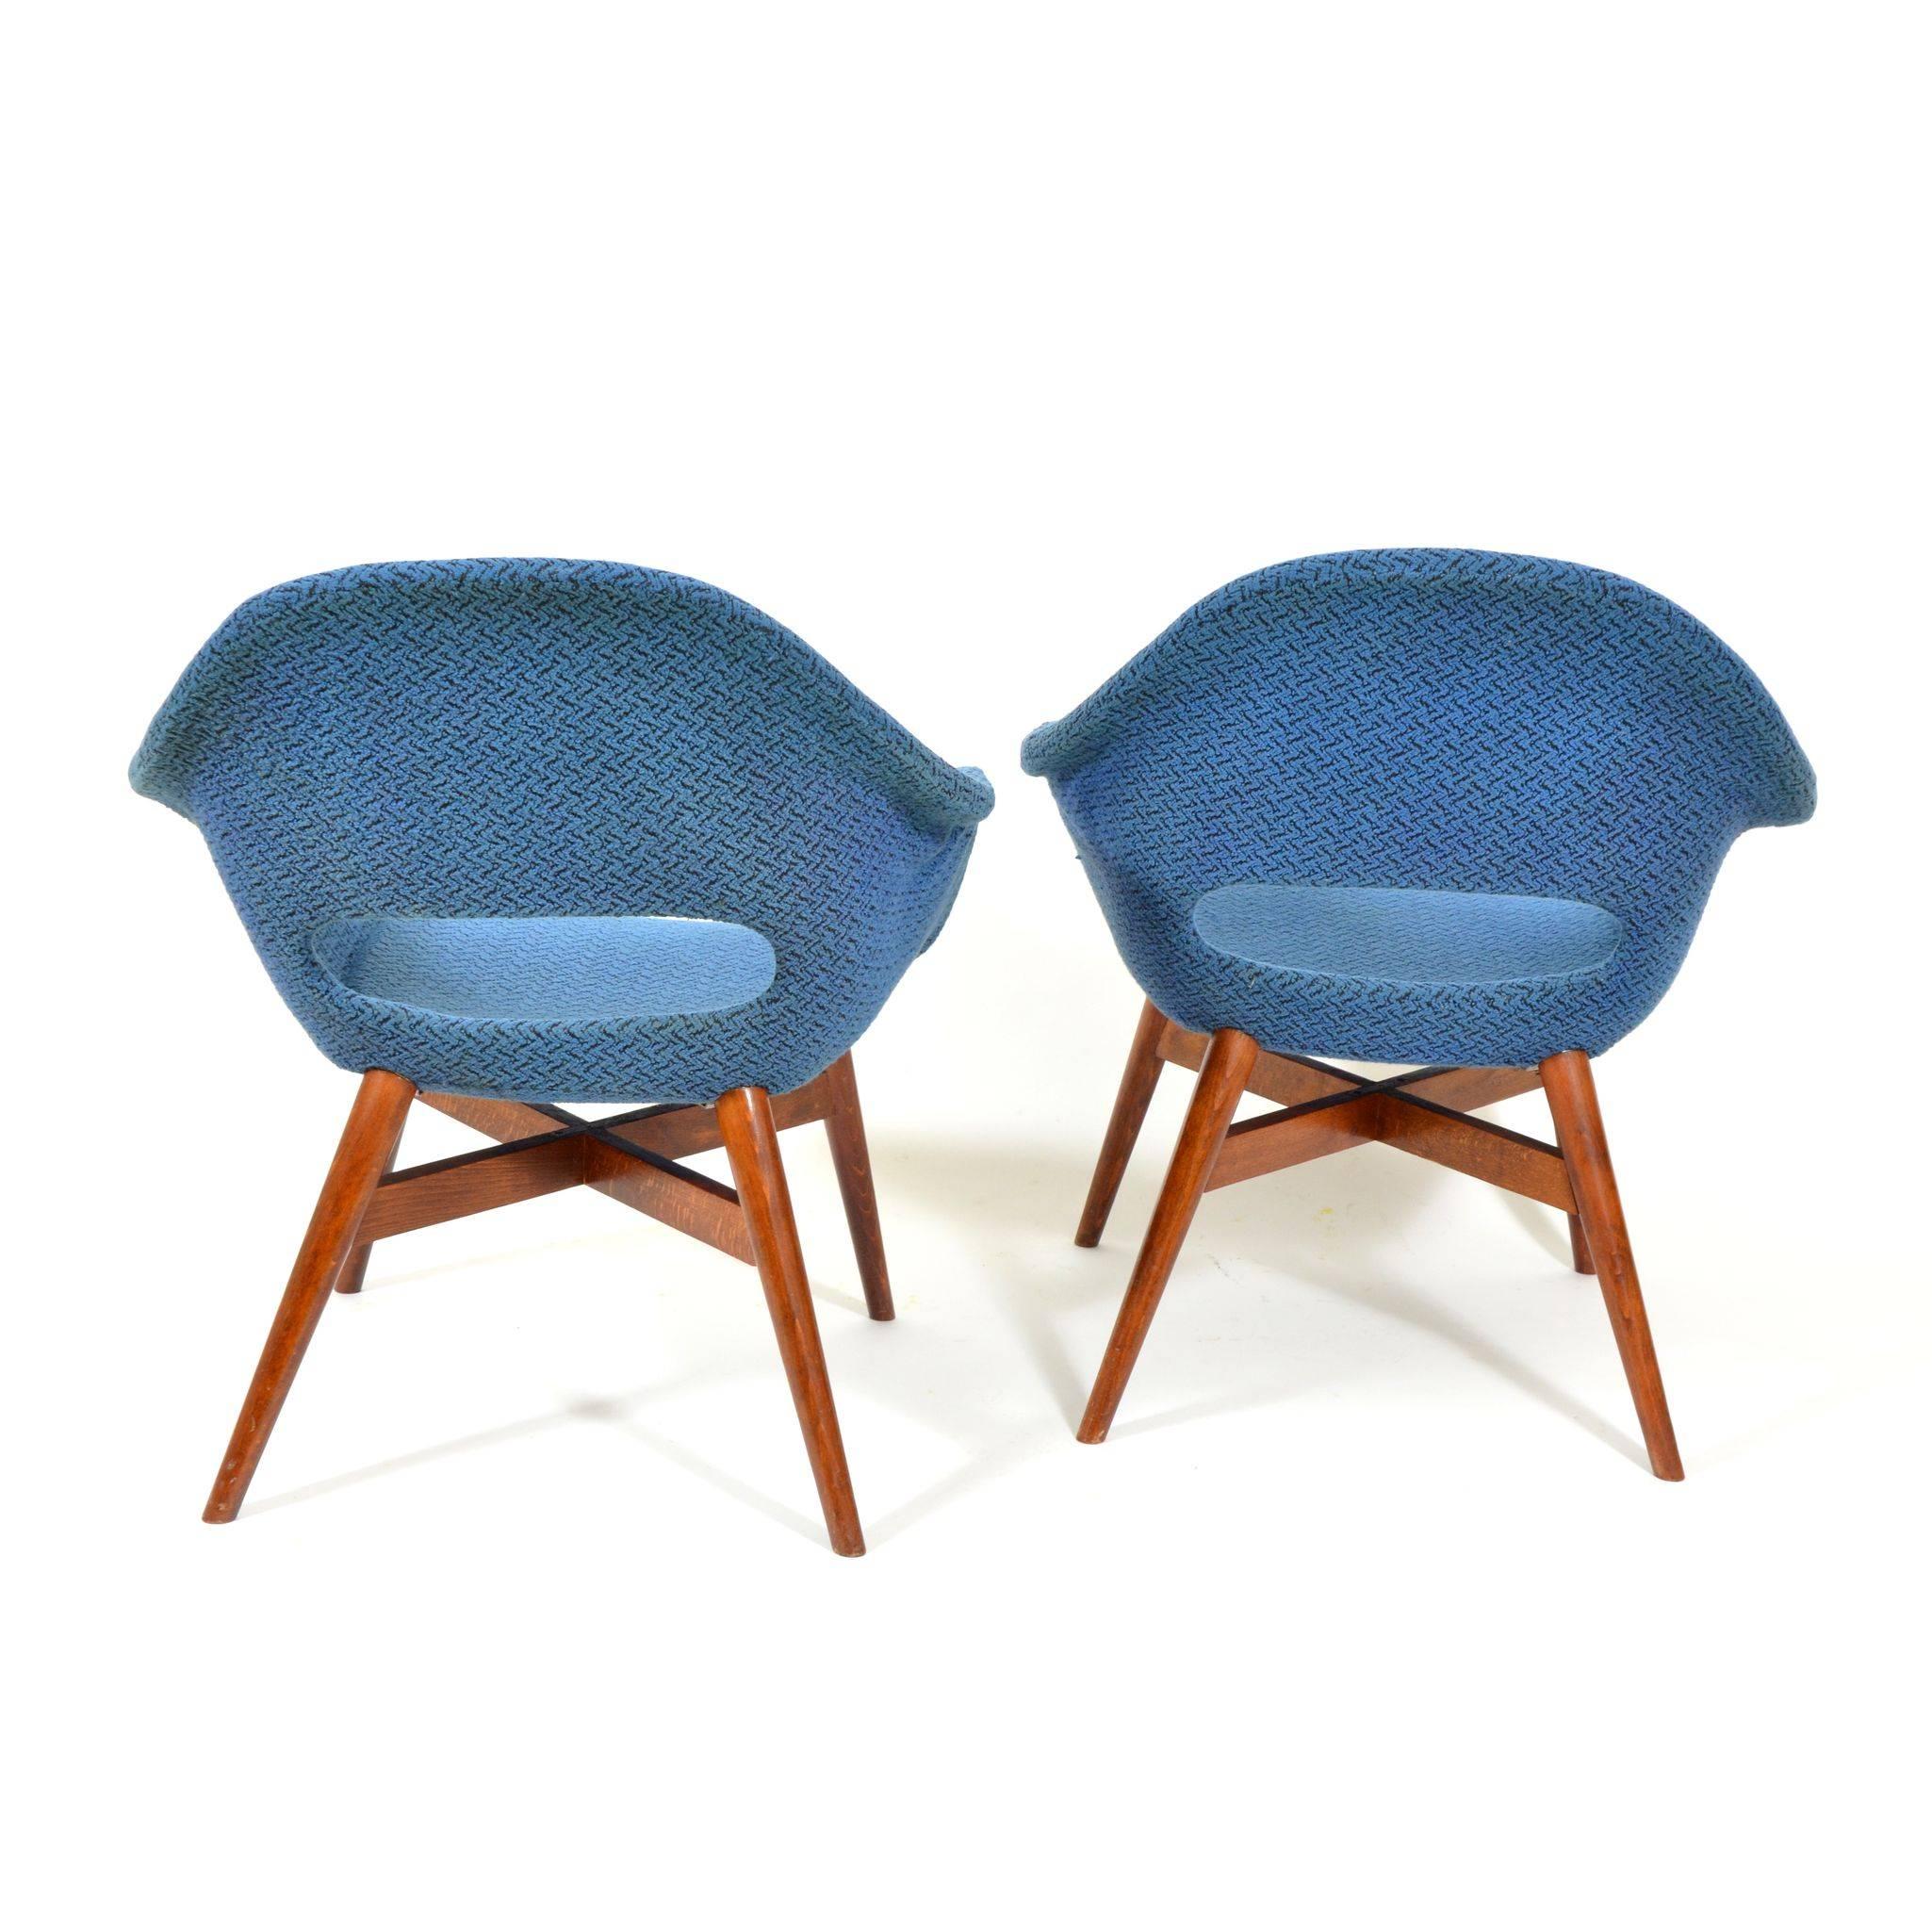 European Pair of Blue Shell Chairs by Miroslav Navrátil, 1960s For Sale